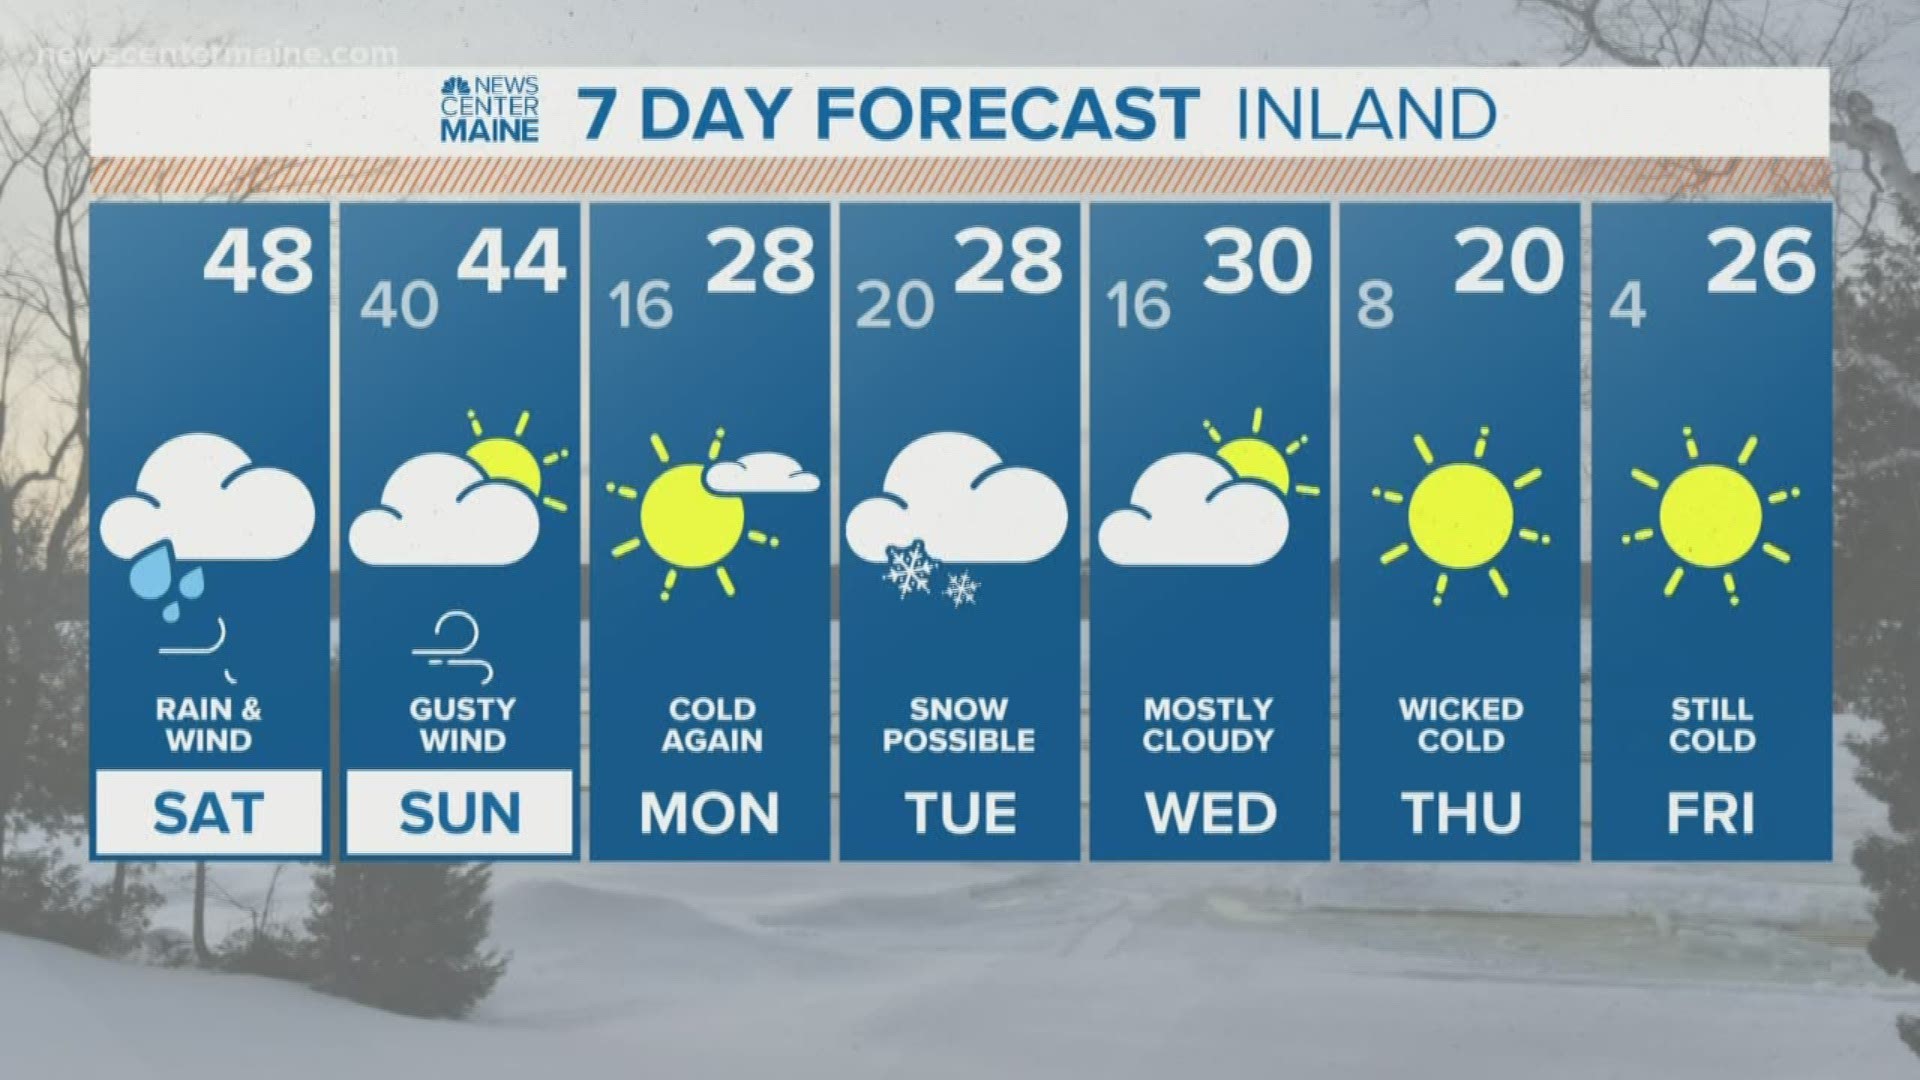 NEWS CENTER Maine Weather Video Forecast. Updated on 12/14/19 at 7:00 am.